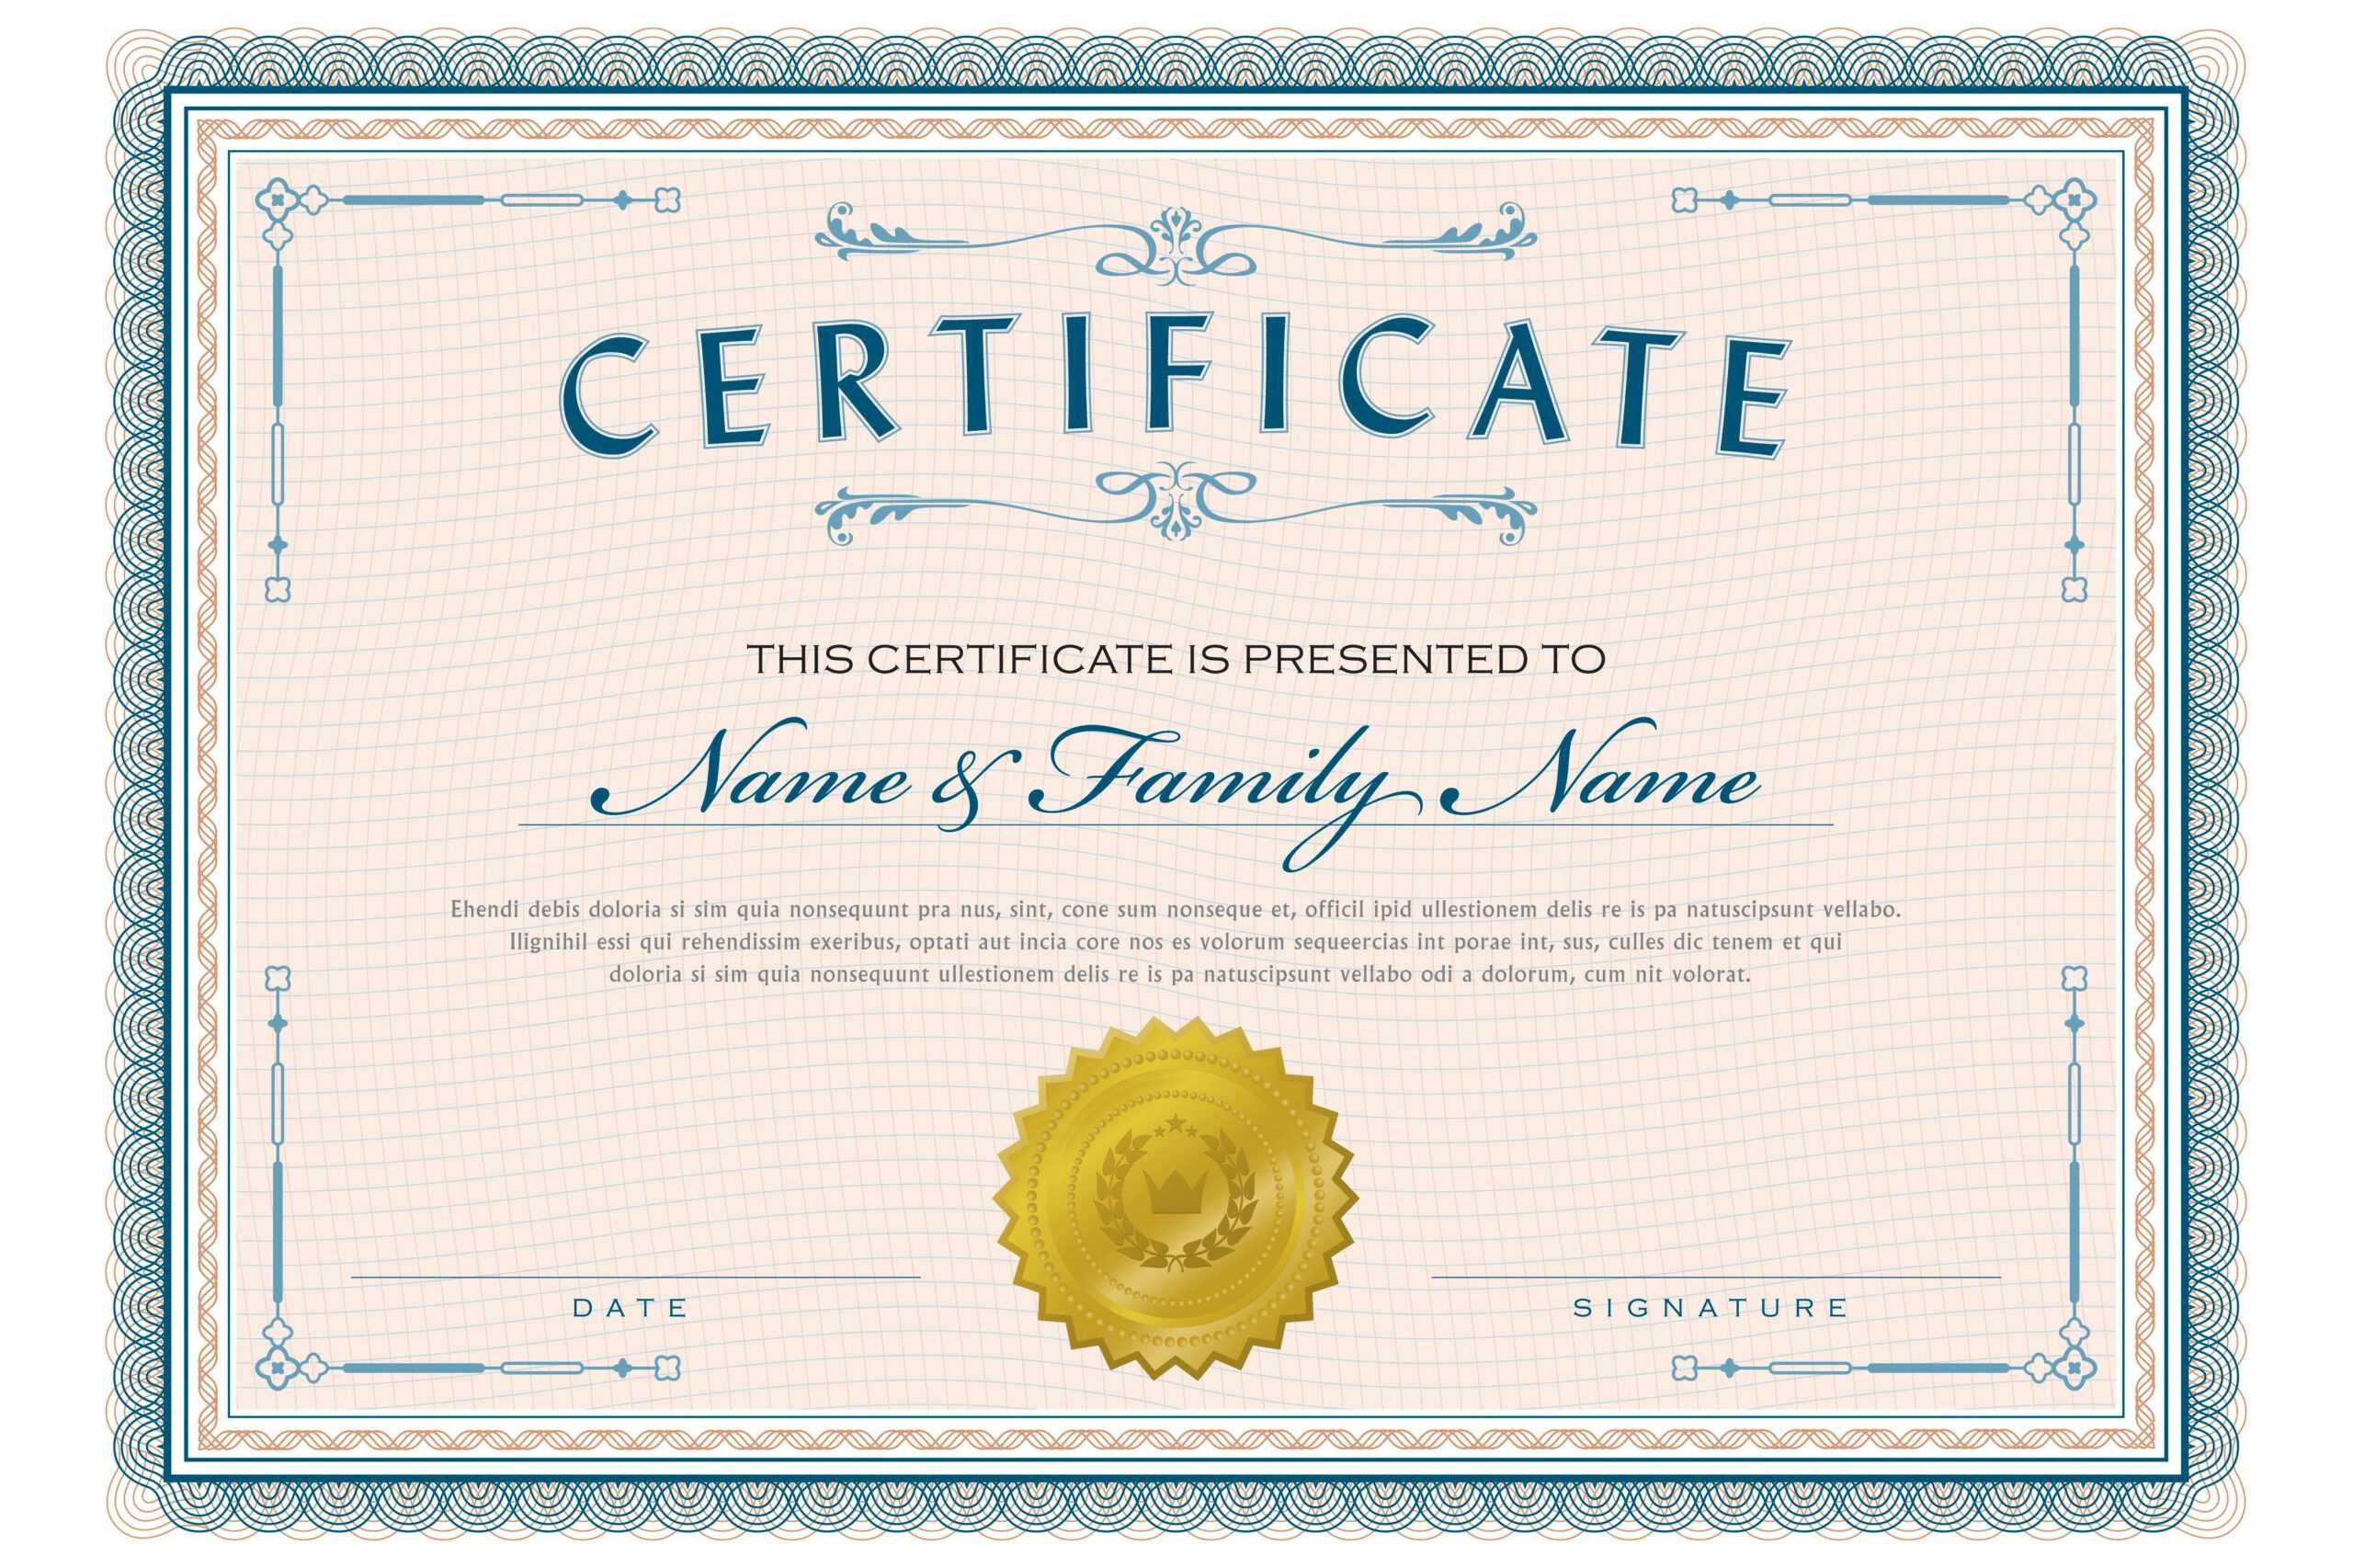 Necessary Parts Of An Award Certificate For Spelling Bee Award Certificate Template